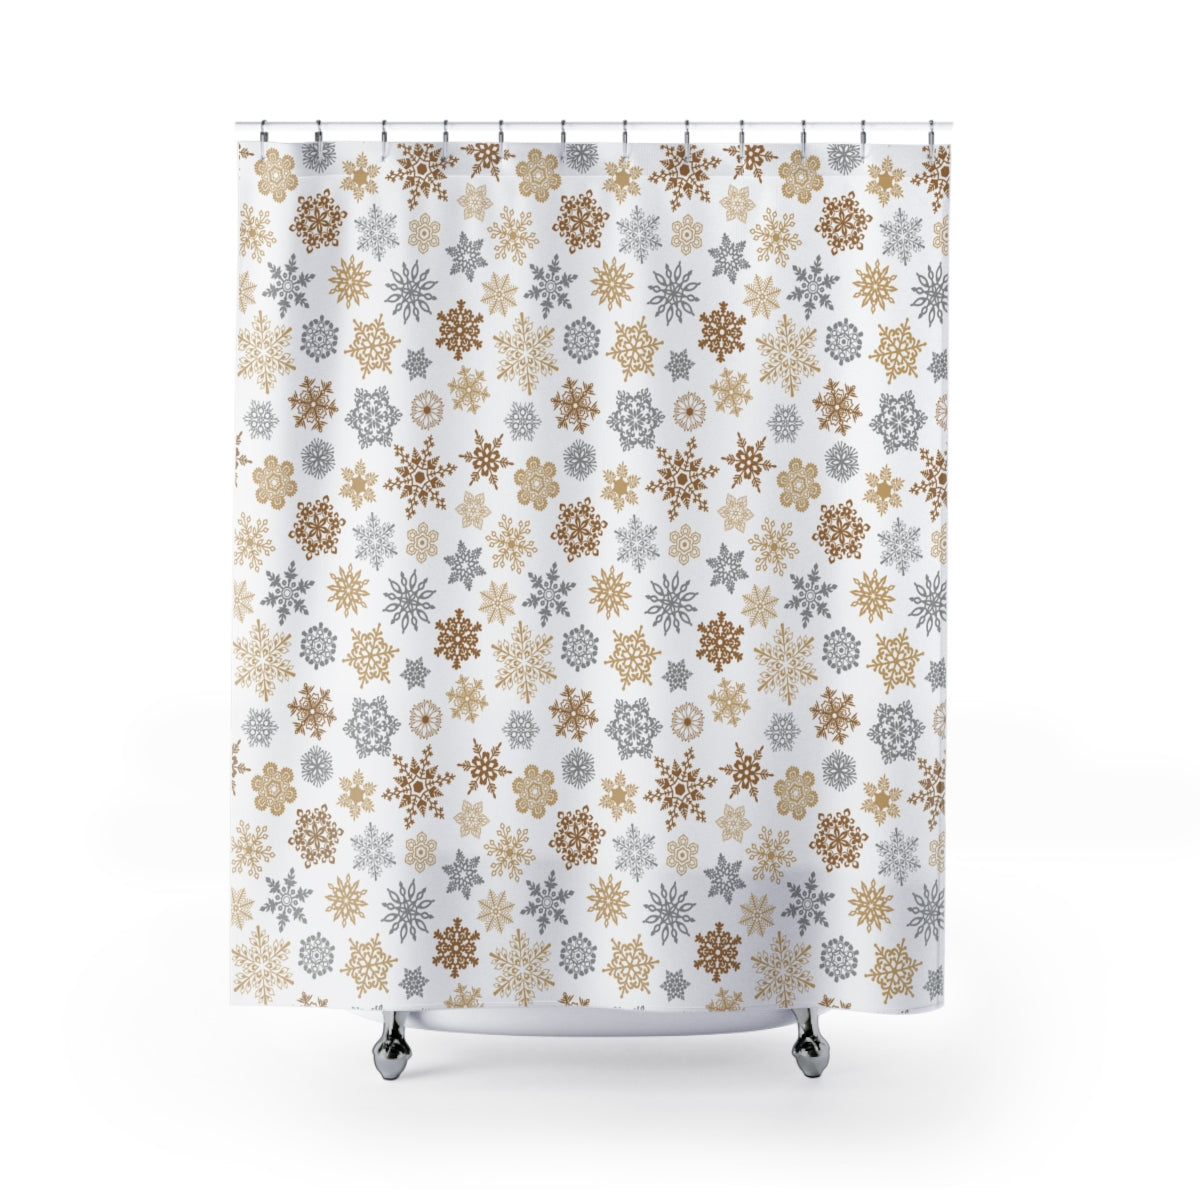 Gold and Silver Snowflakes Shower Curtain